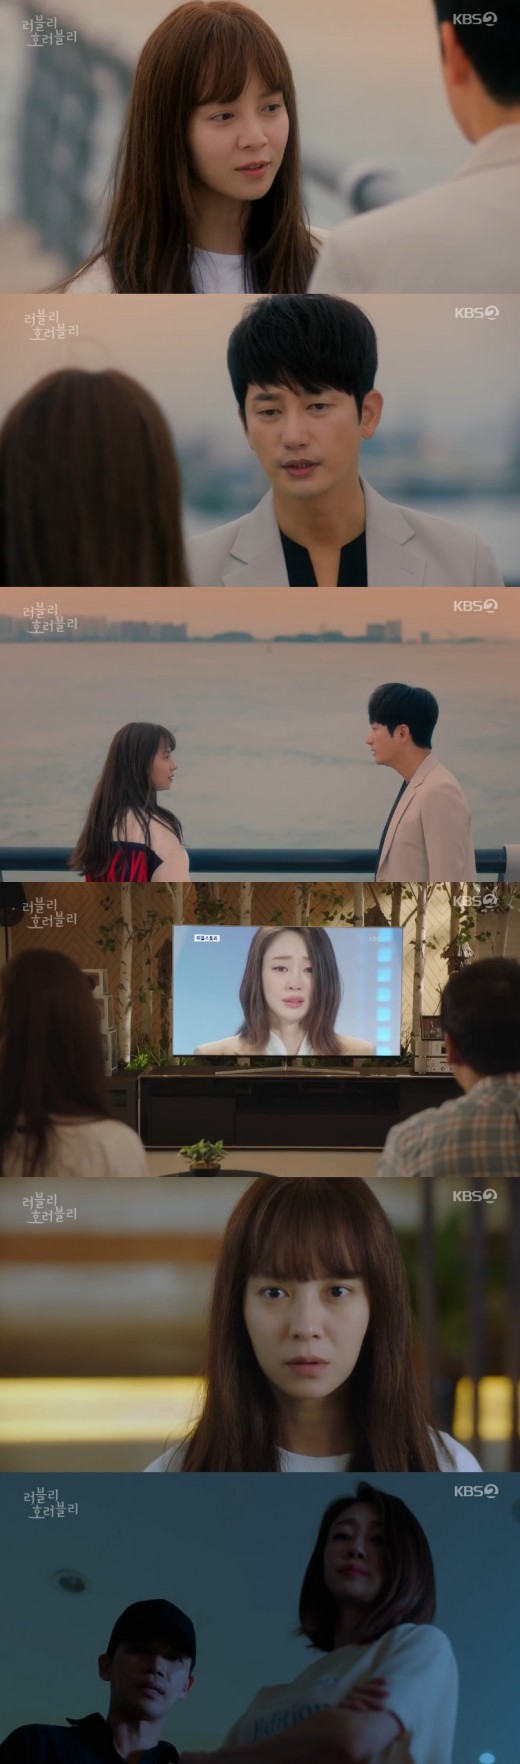 Song Ji-hyo threw his luck for Park Si-hoo, a special measure to comfort him in anxiety.In KBS2 Lovely Horrible, which aired on the 4th, Philip Roth (Park Si-hoo), who shows a weak figure in front of Song Ji-hyo, was portrayed.Am Soon-ah (Ham Eun-jeong), who happened to witness the scene, began to become conscious of Eul-soon as Eul-soon and Philip Roth went to the house to fulfill the terms of the contract.Dong-cheol, who was on the run with a gunshot wound to Philip Roth, is suffering from confusion.In the meantime, Joo Eun-young (Choi Yeo-jin) appeared in the news as the author of Love of Ghosts shamelessly.Joo Eun-young claimed that Dong-chul was his reporter and that he was inspired by the love of ghosts through him: that Philip Roth took away Dong-chuls opportunities in the past.Even the end of the assistant writer revision was explained in the aftermath of this case. The killer of the correction was Joo Eun-young himself.On the day of the Corrections murder, she agonizedly waited for Joo Eun-young; but Joo Eun-young and Dong Chul were in one. Correction was finally killed.Philip Roth felt responsible for the fall of Dongcheol. Philip Roth said, You said you were taken away from me.Is it someone who makes people unhappy by my side? Philip Roth said in front of Eulsun, He asked me to help him, Dong-cheol, why did he call me, did he really call me to finish this time?Not that, Eulsun said, I would have known if it was that, and I think Philip Roth is fine.Still, Philip Roth said, I never imagined Dong-cheol being so hurt. I feel like someone whos around me is a bitch.Youre going to run away from me.So Eulsun soothed his anxiety by throwing a necklace in front of Philip Roth.